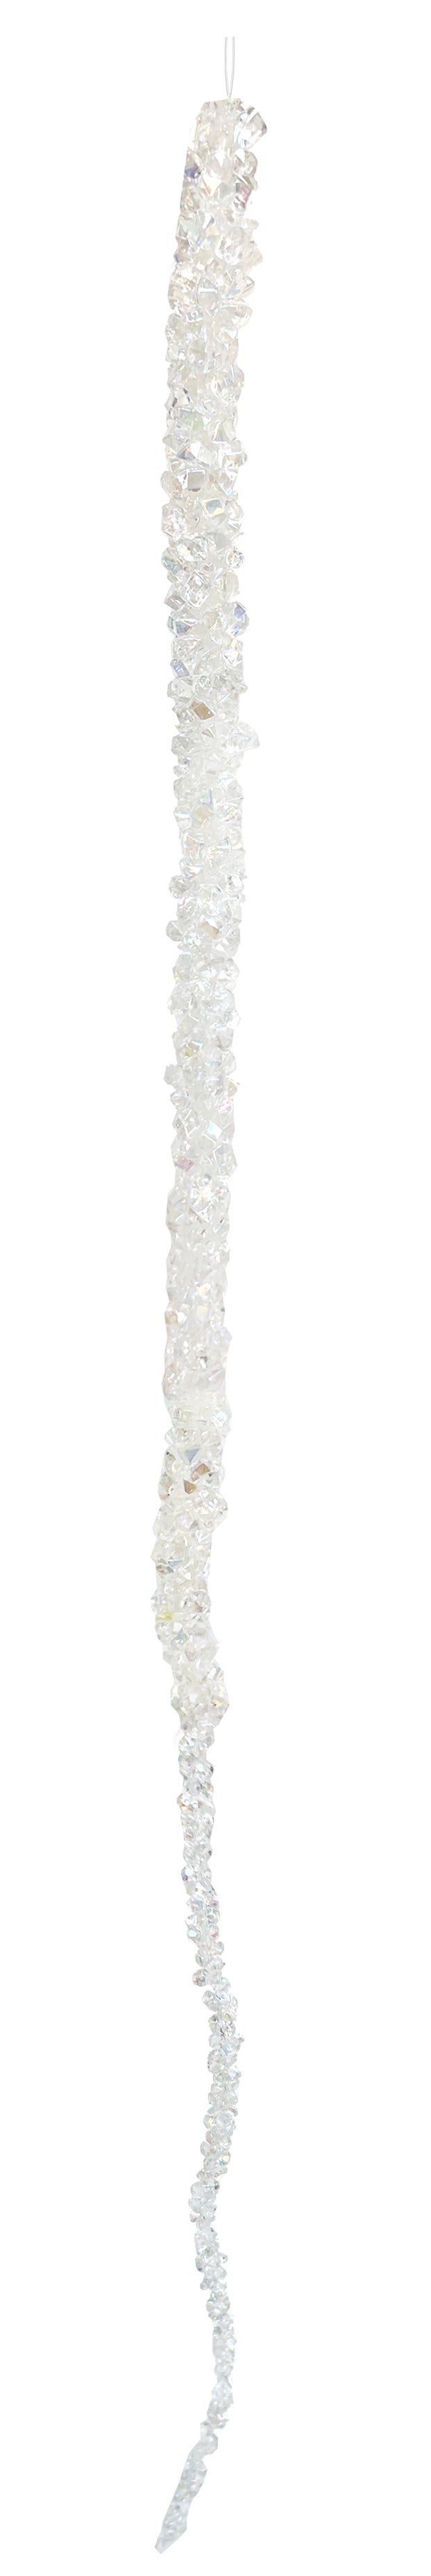 Icicle Ornament